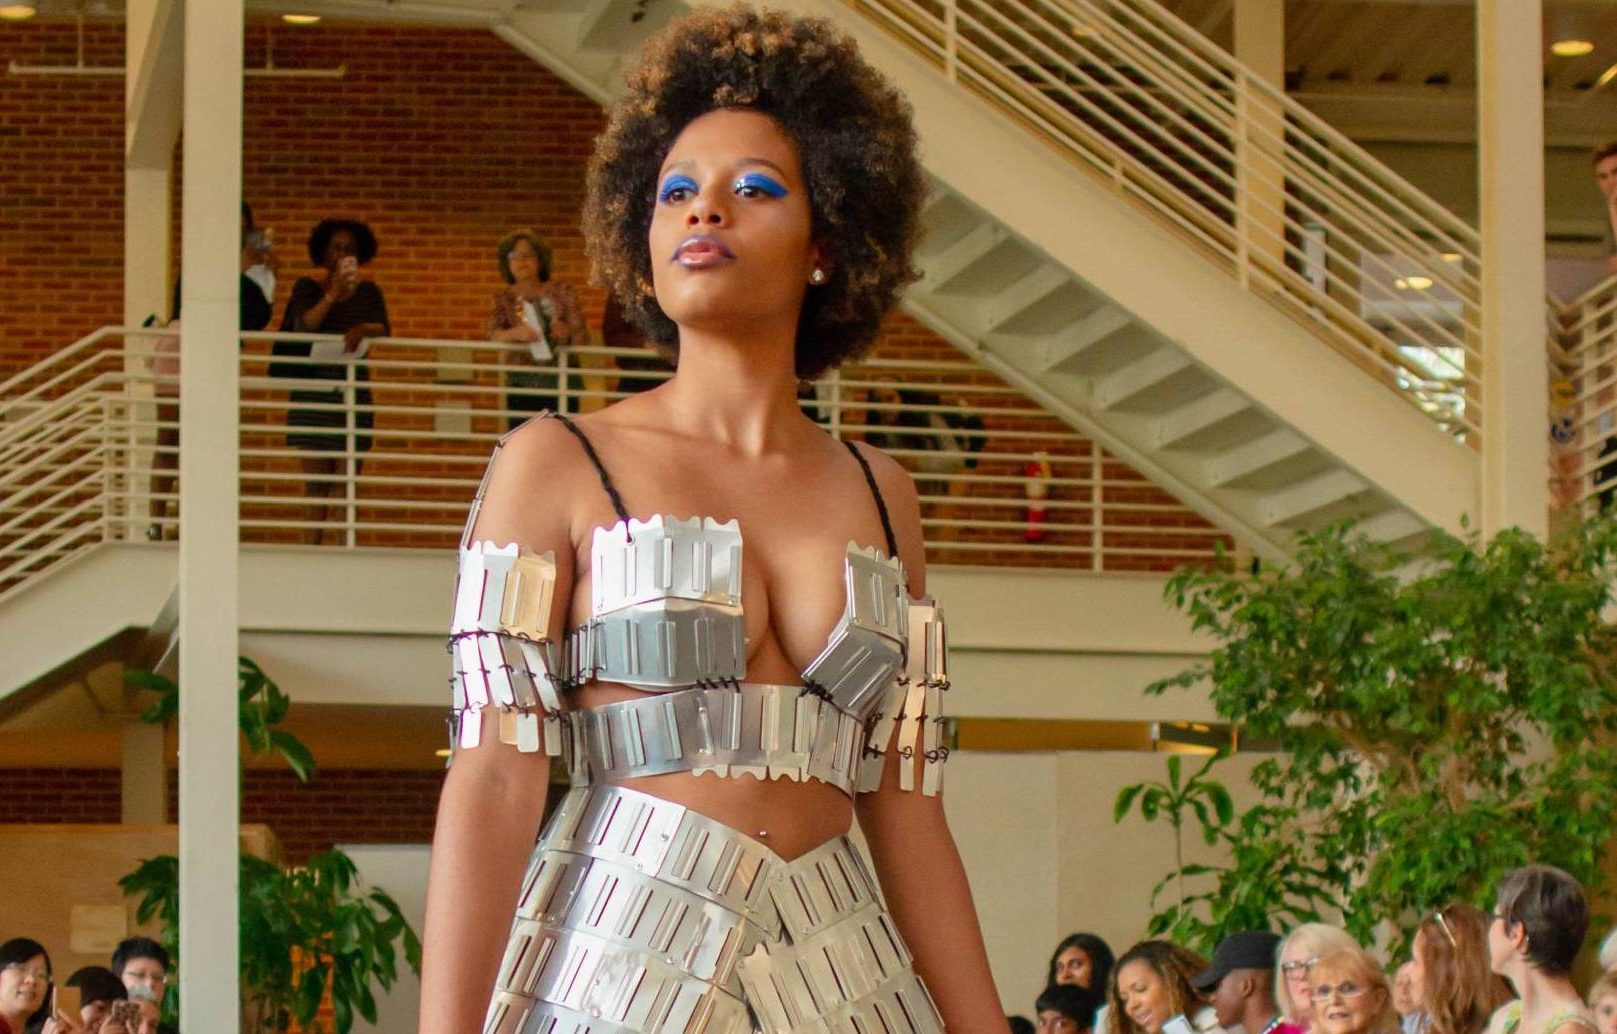 A runway model. A Black woman models a silver metallic top and skirt. The top is off the shoulder. The skirt tapers in the middle. She is wearing blue eyeshadow.